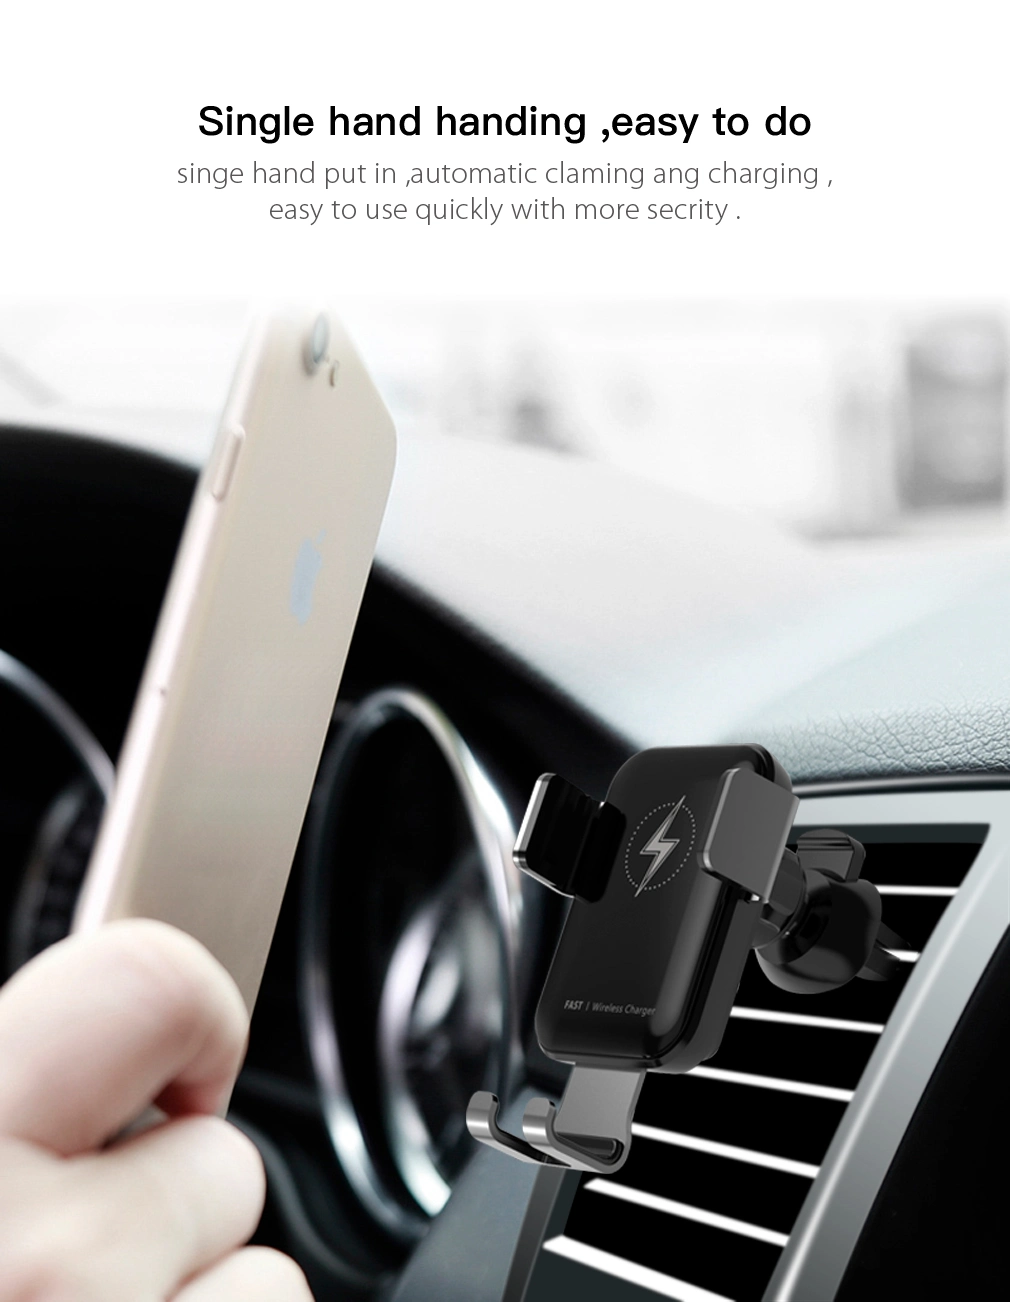 Wireless Car Charger Automatic Clamping 15W Qi Wireless Charger Car Compatible with iPhone, Samsung, HTC